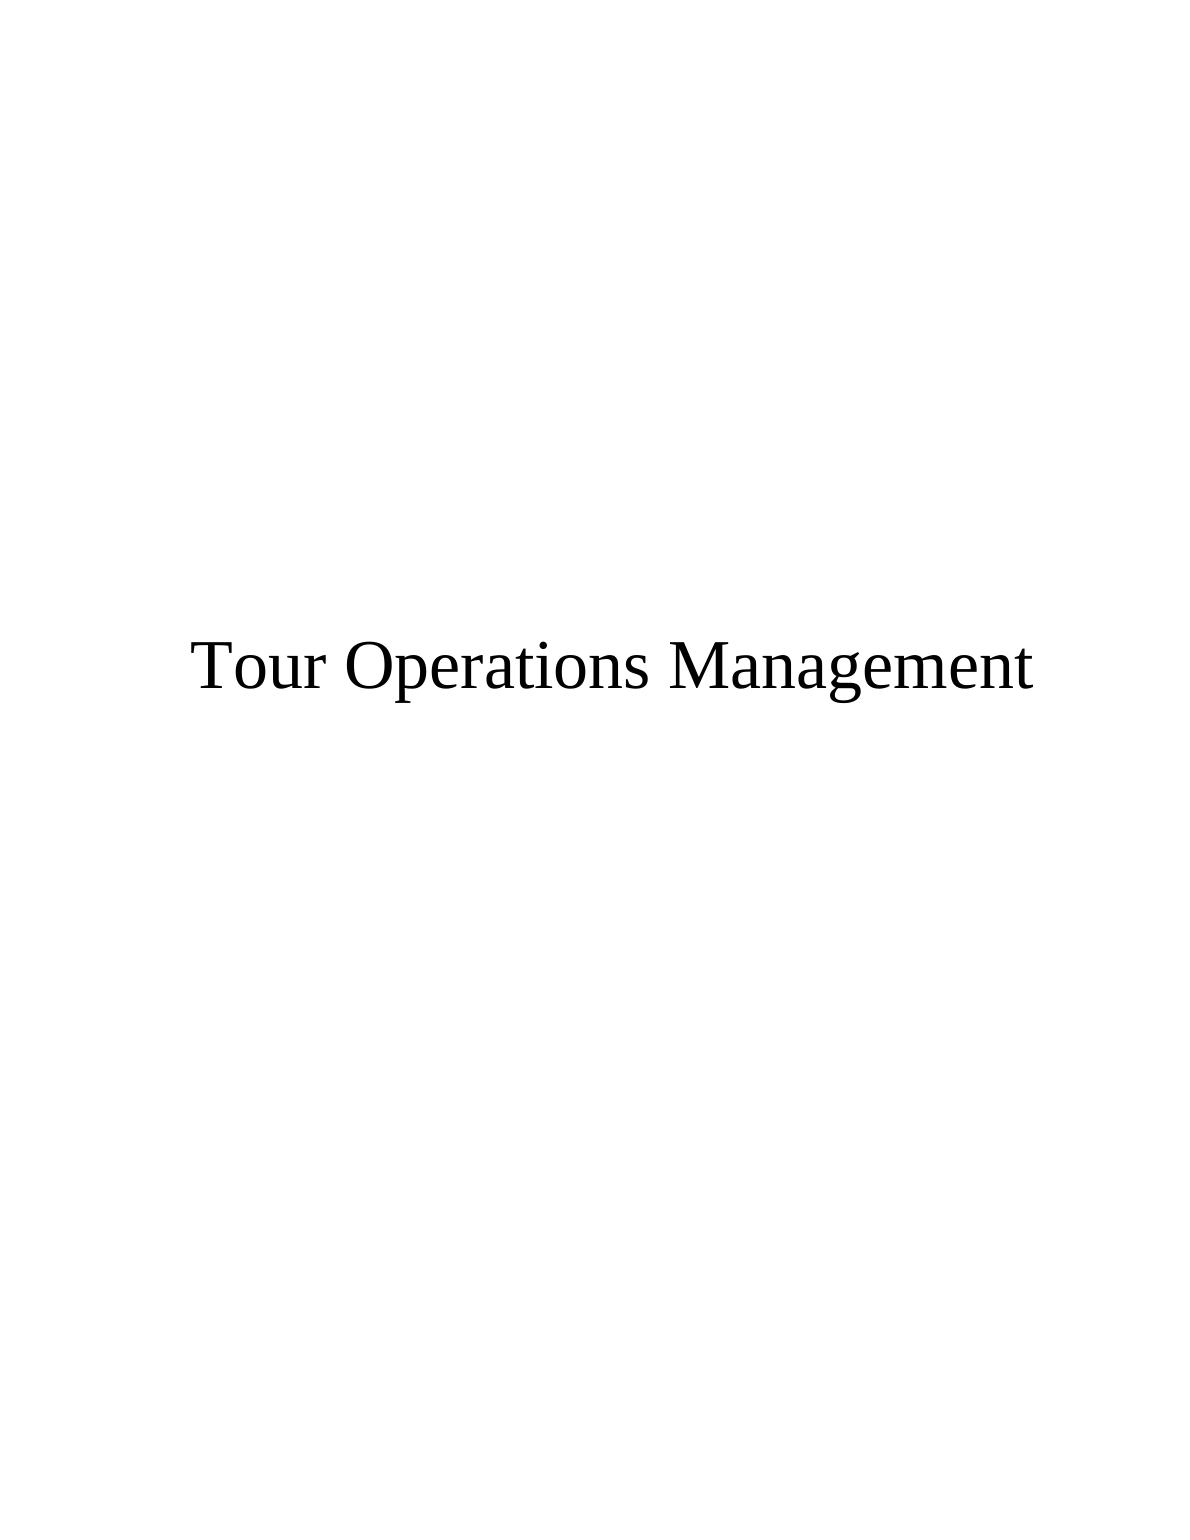 Sample Assignment on Tour Operations Management_1